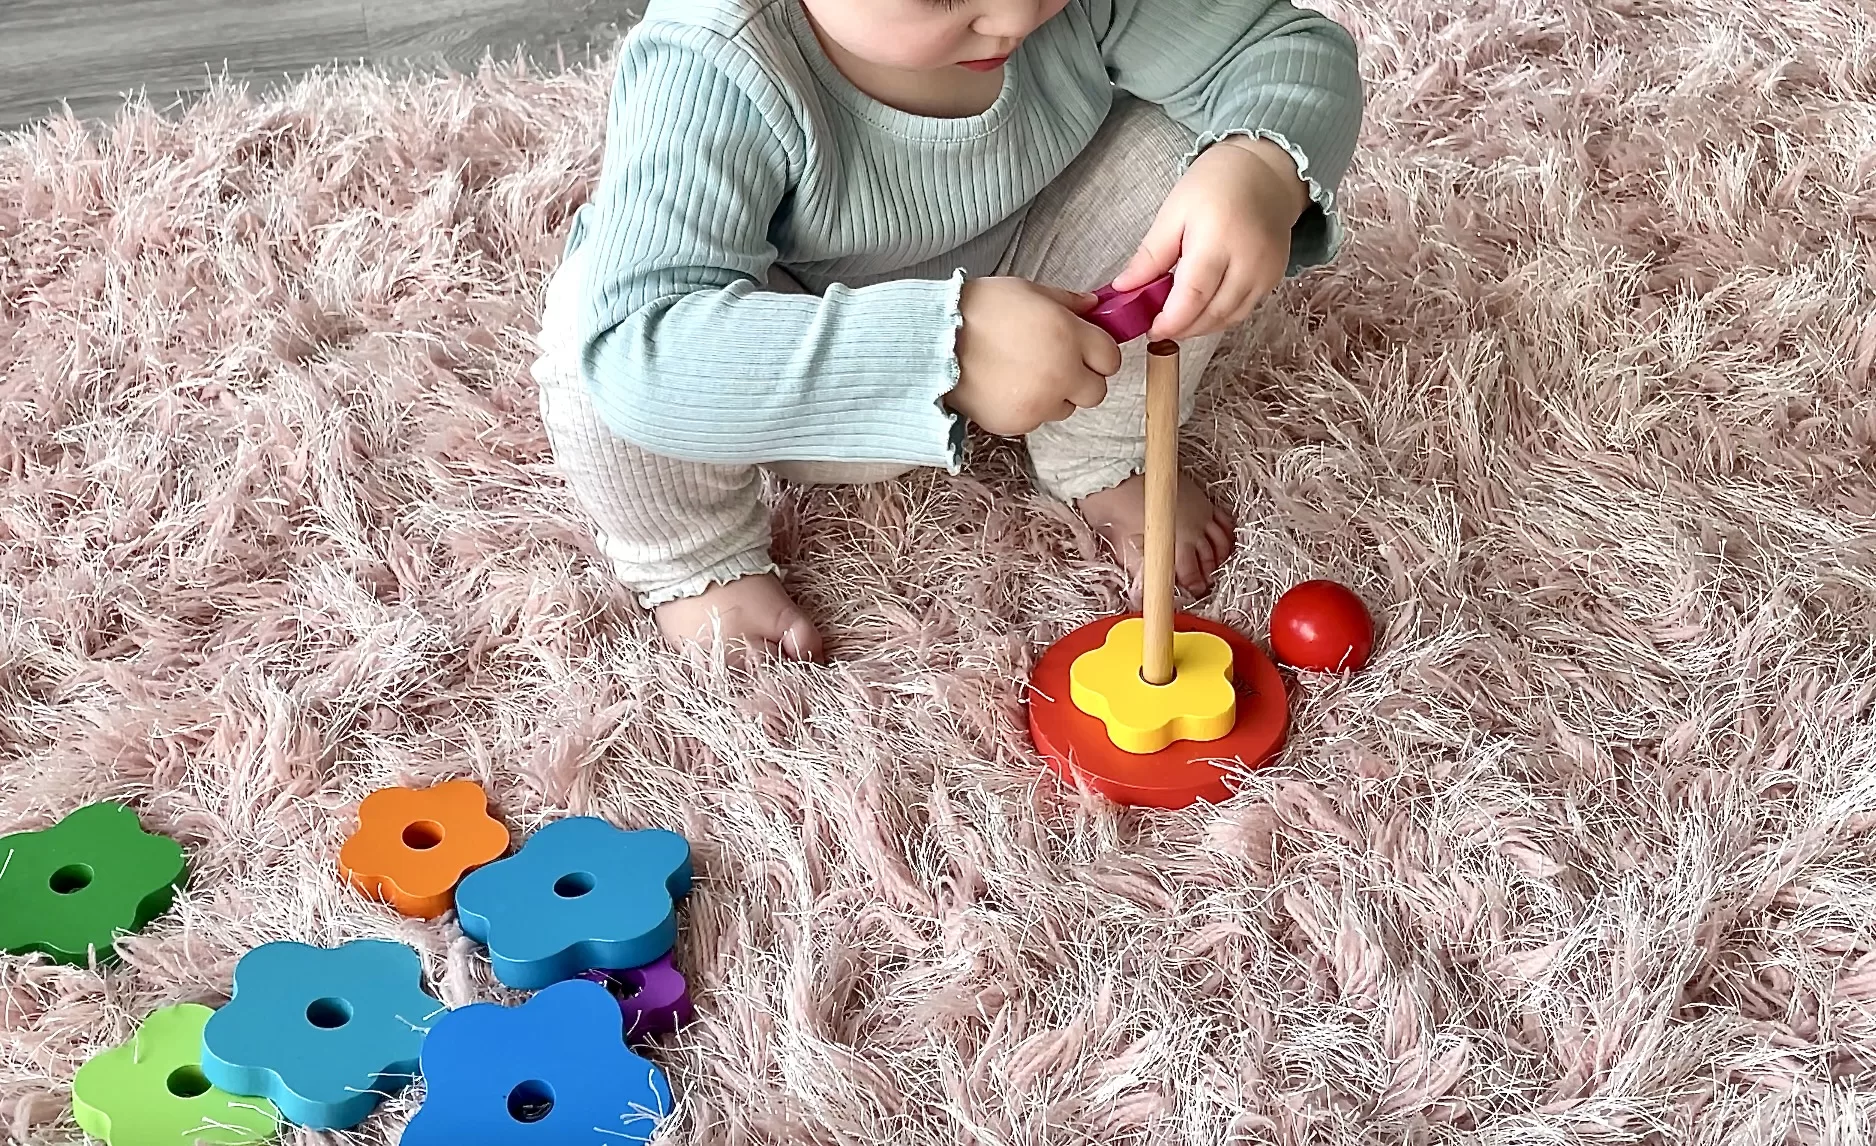 Toddler playing with rainbow stacking toy
